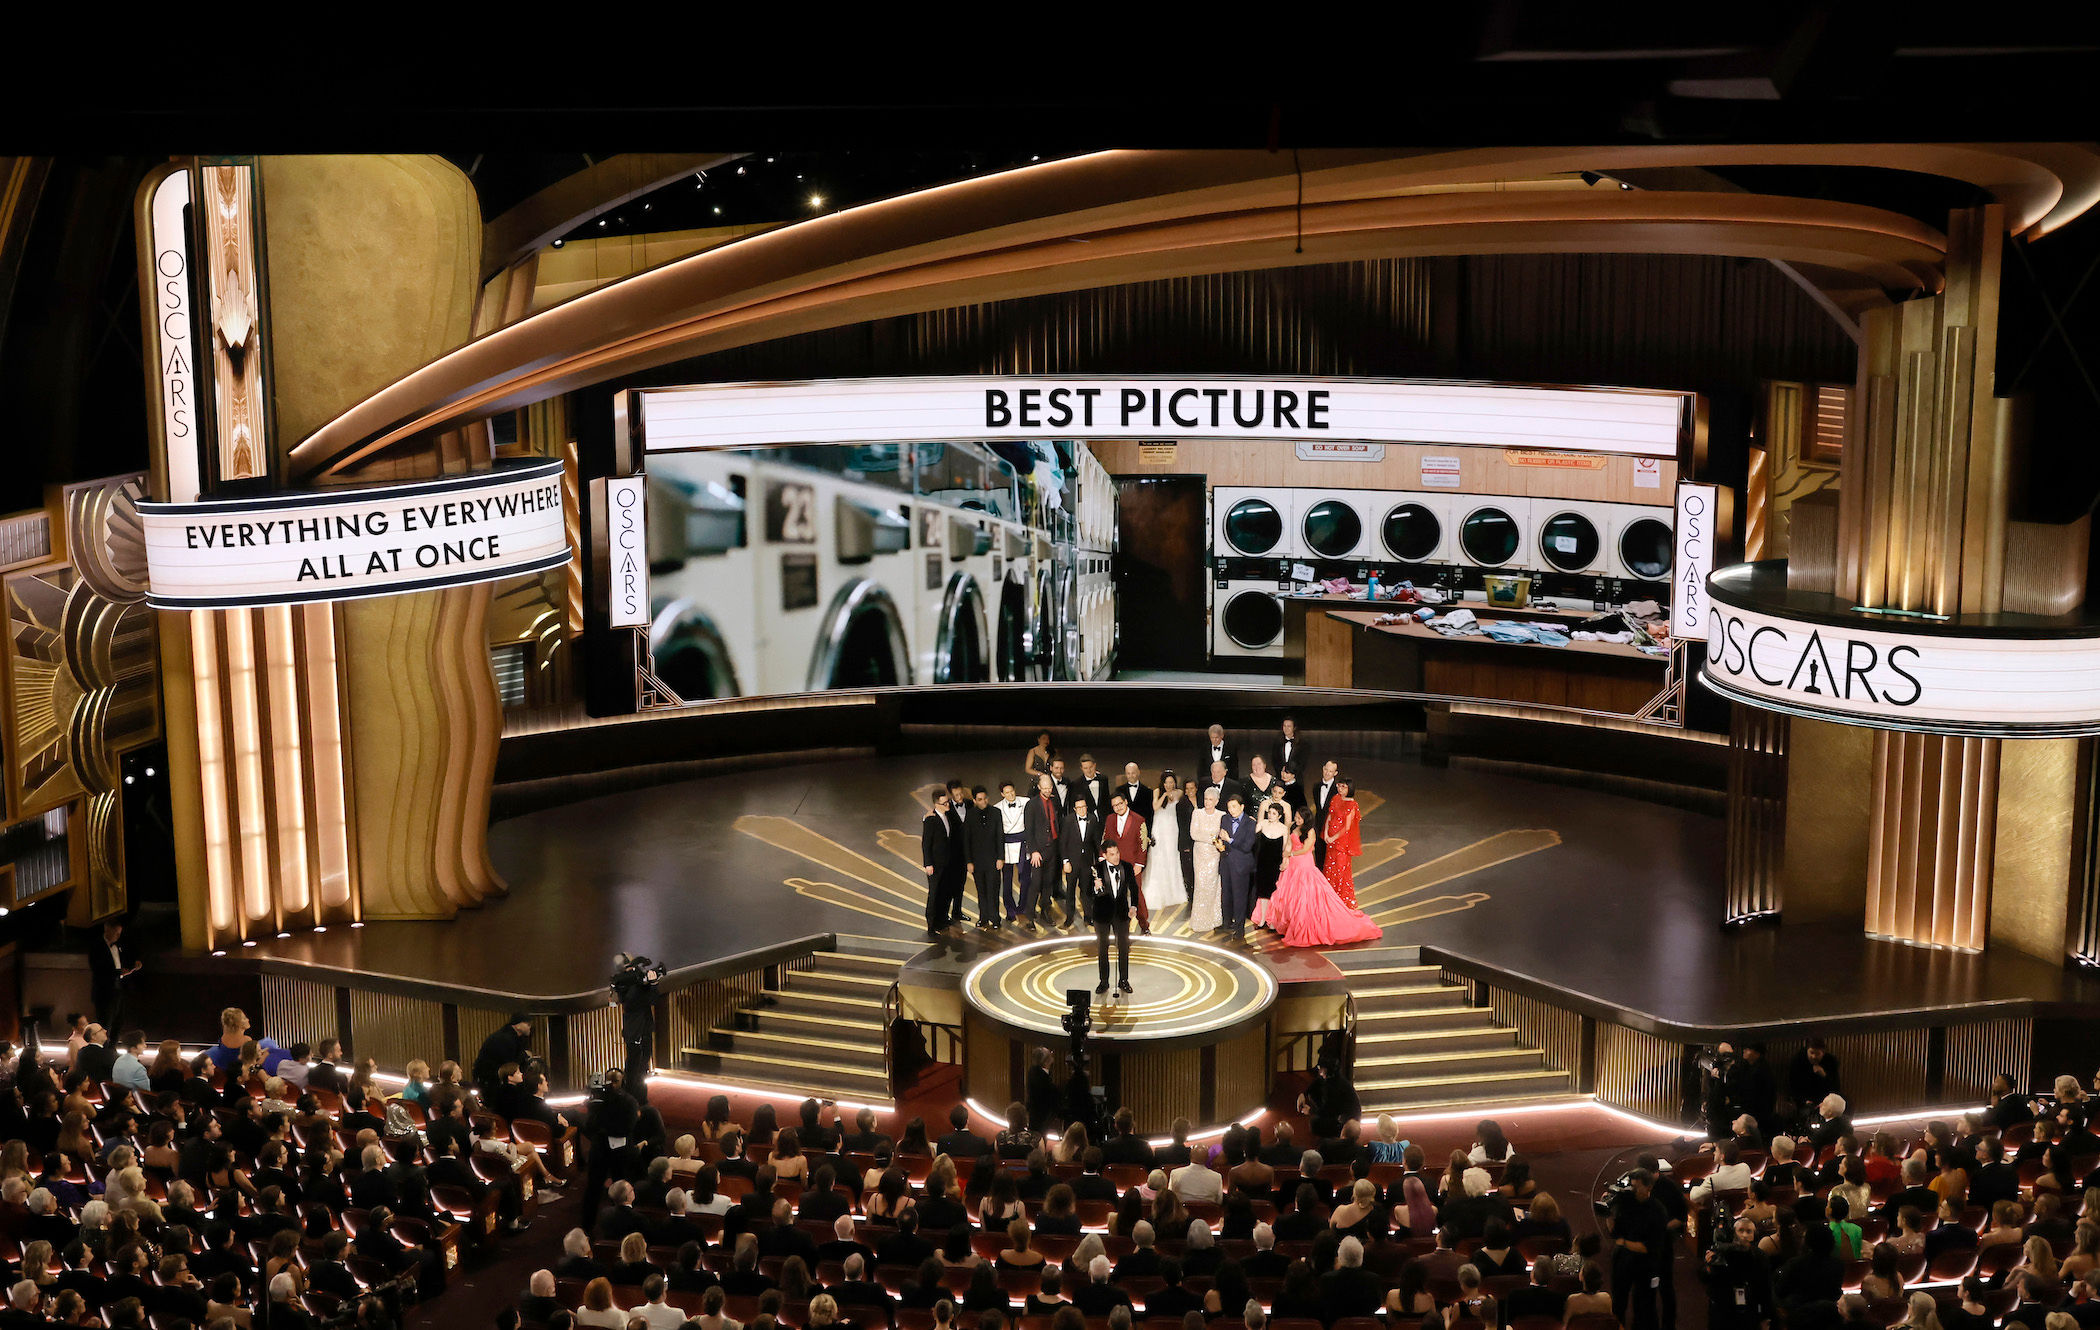 Everything Everywhere All at Once': Small Detail Predicted Oscars Wins